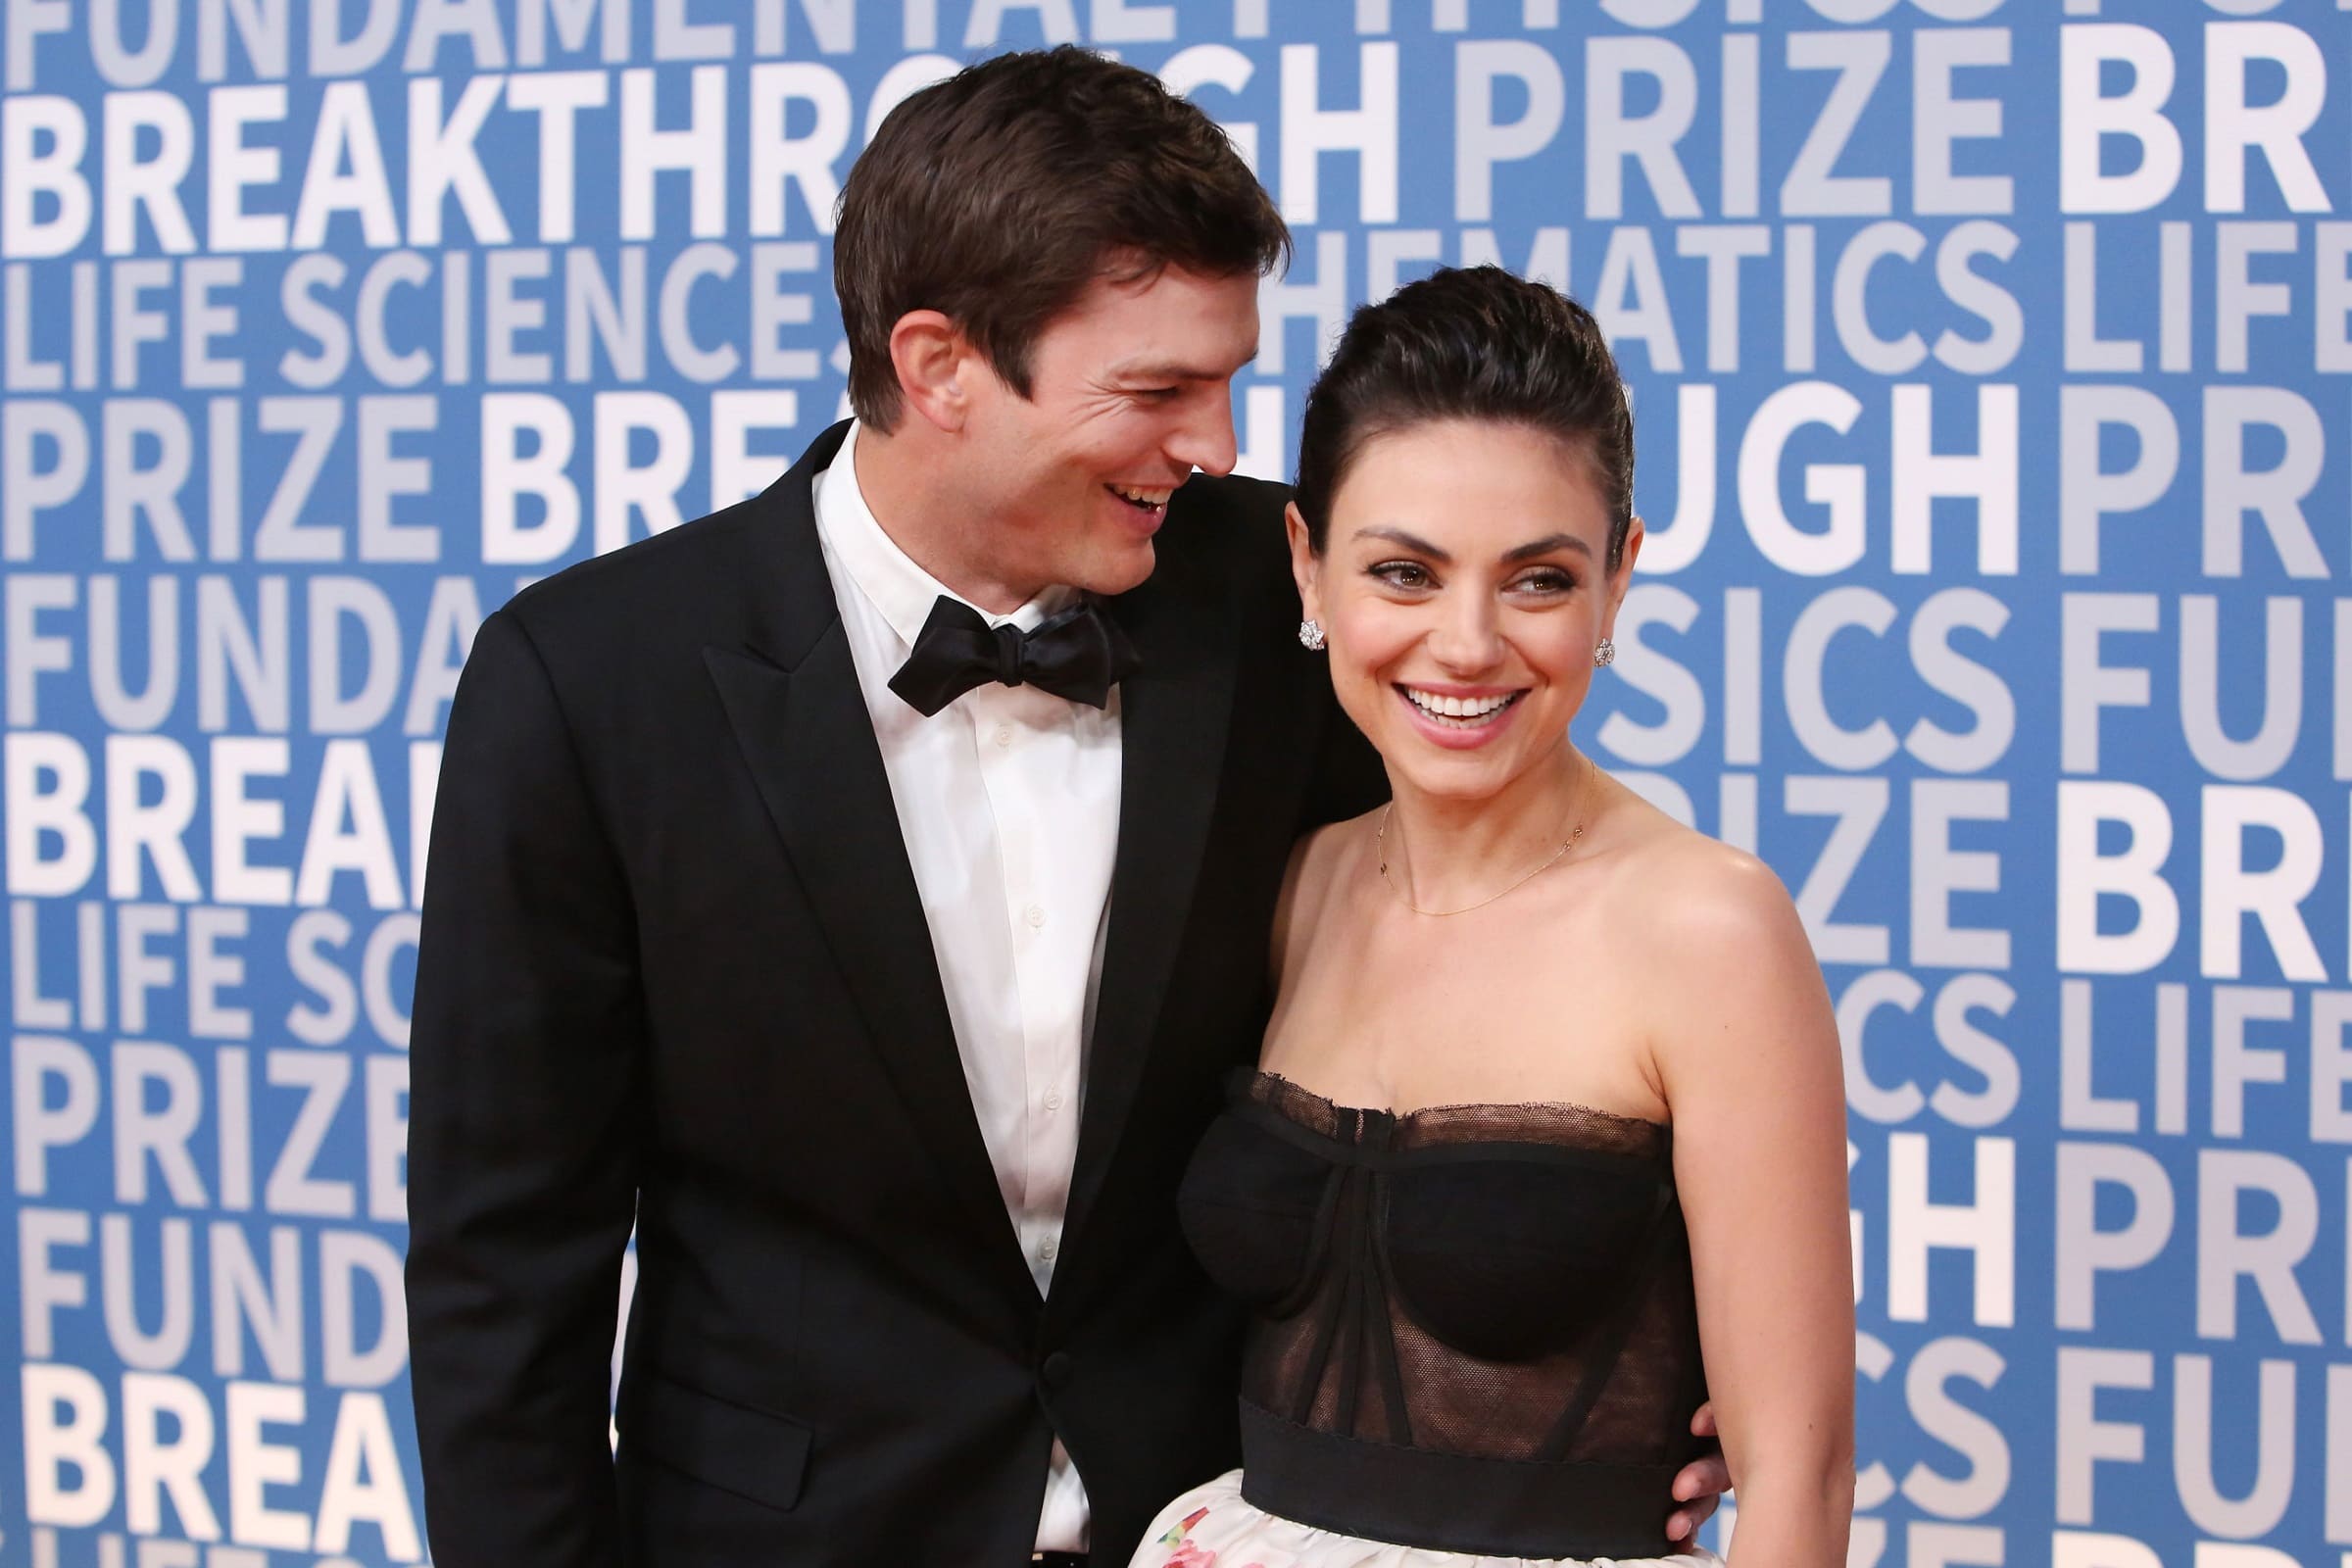 You can all unclutch your pearls: Mila Kunis and Ashton Kutcher have decided bathing their children is okay after all. Laugh with their response to critics!